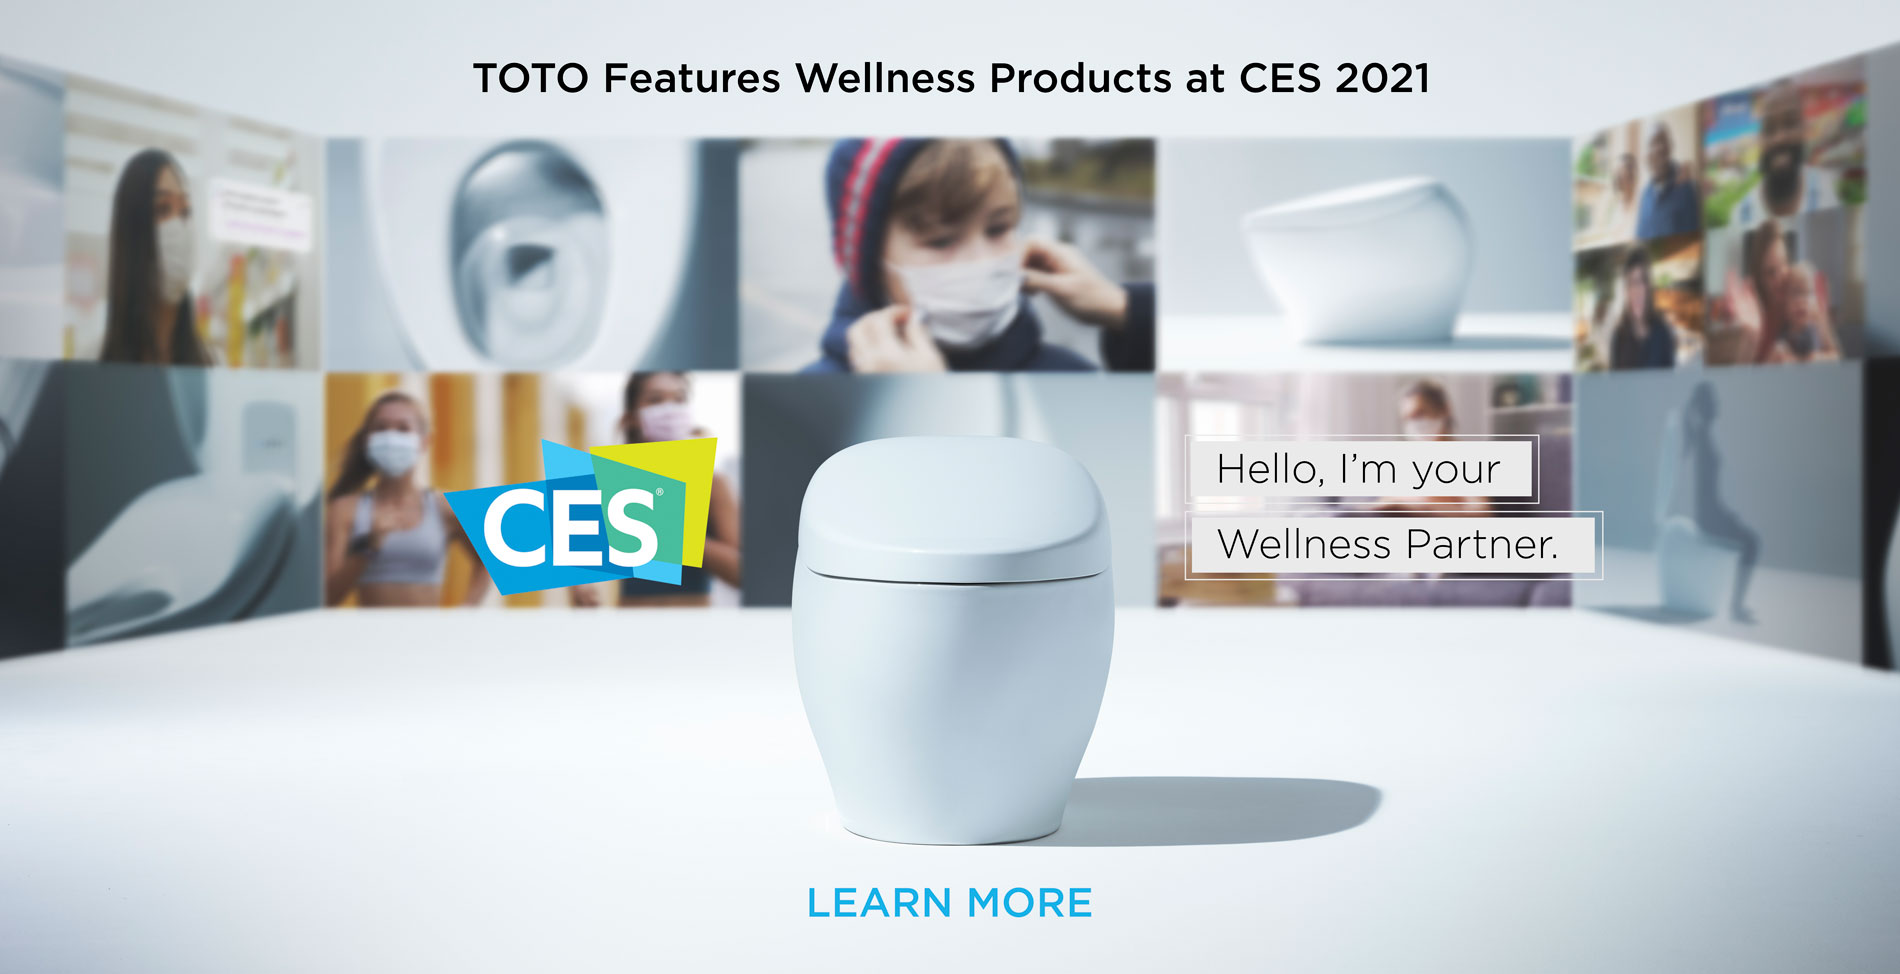 TOTO Features Wellness Products at CES 2021. Hello, I'm your Wellness Partner. LEARN MORE.